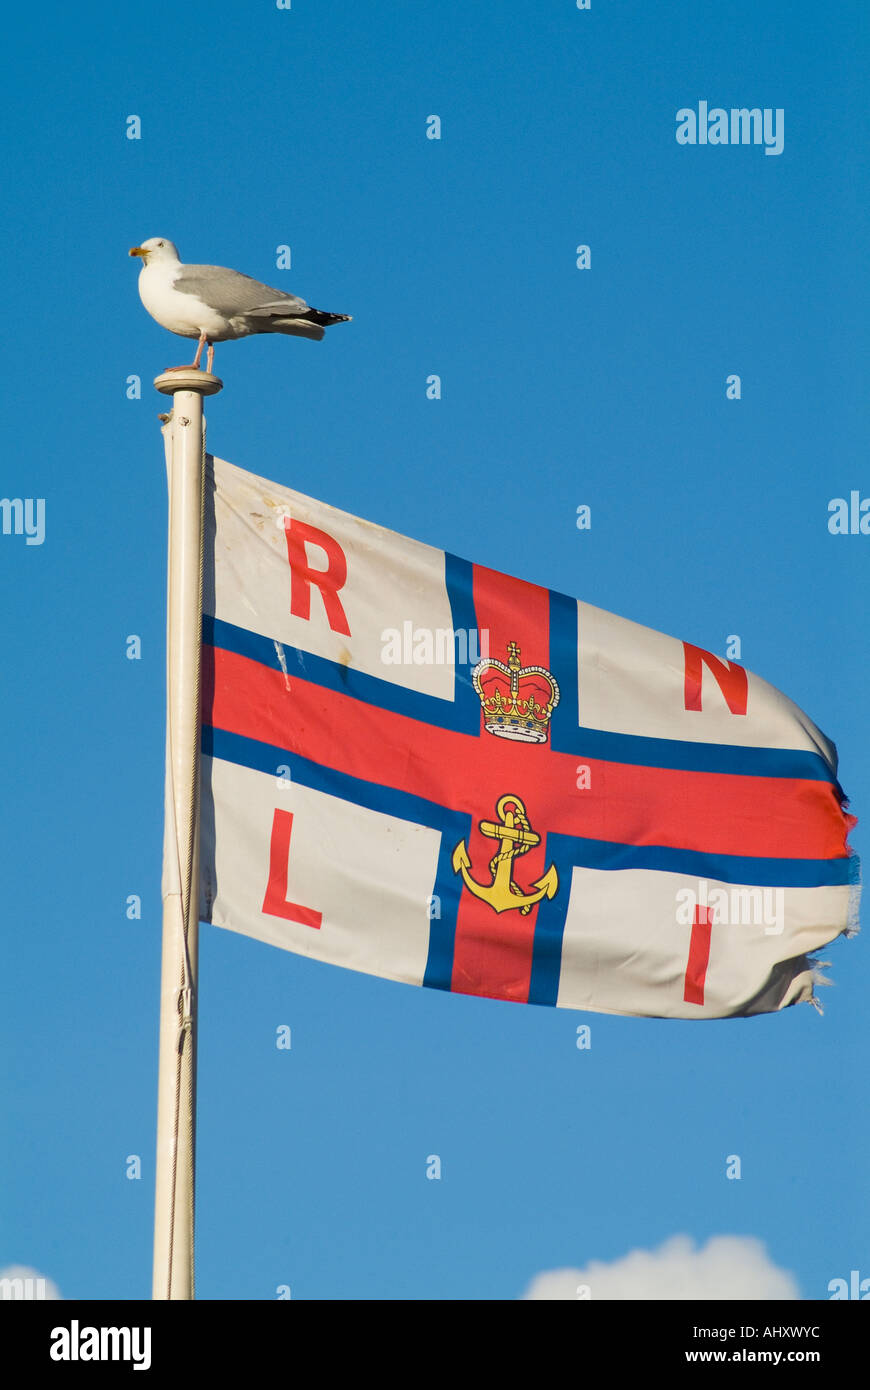 dh RNLI Fahne Flagge UK Möwe sitzt am Royal National Lifeboat Institution Flagge Stockfoto